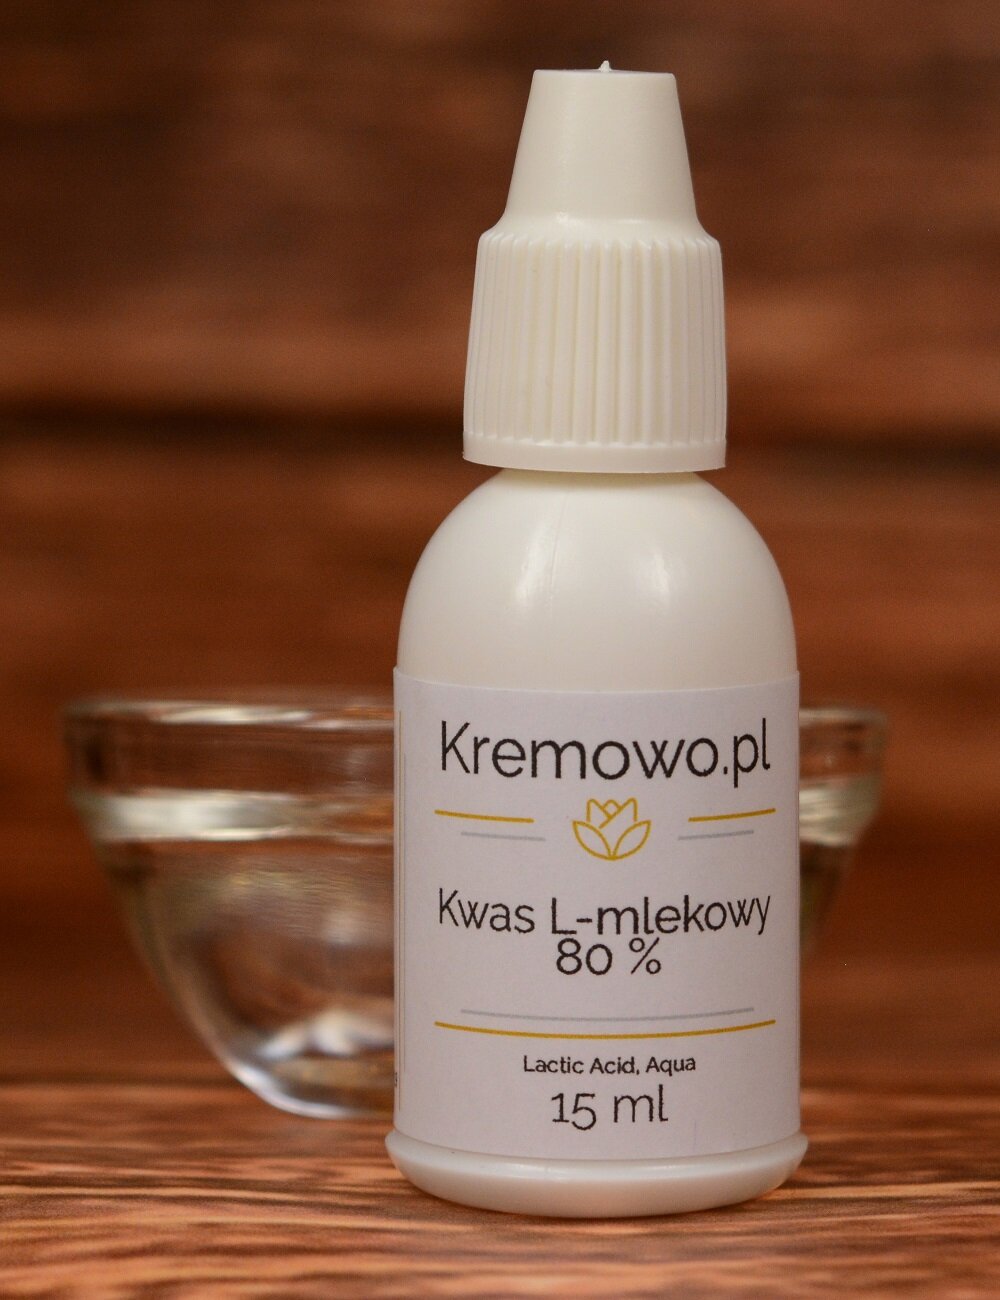 Kwas L-mlekowy 80 %